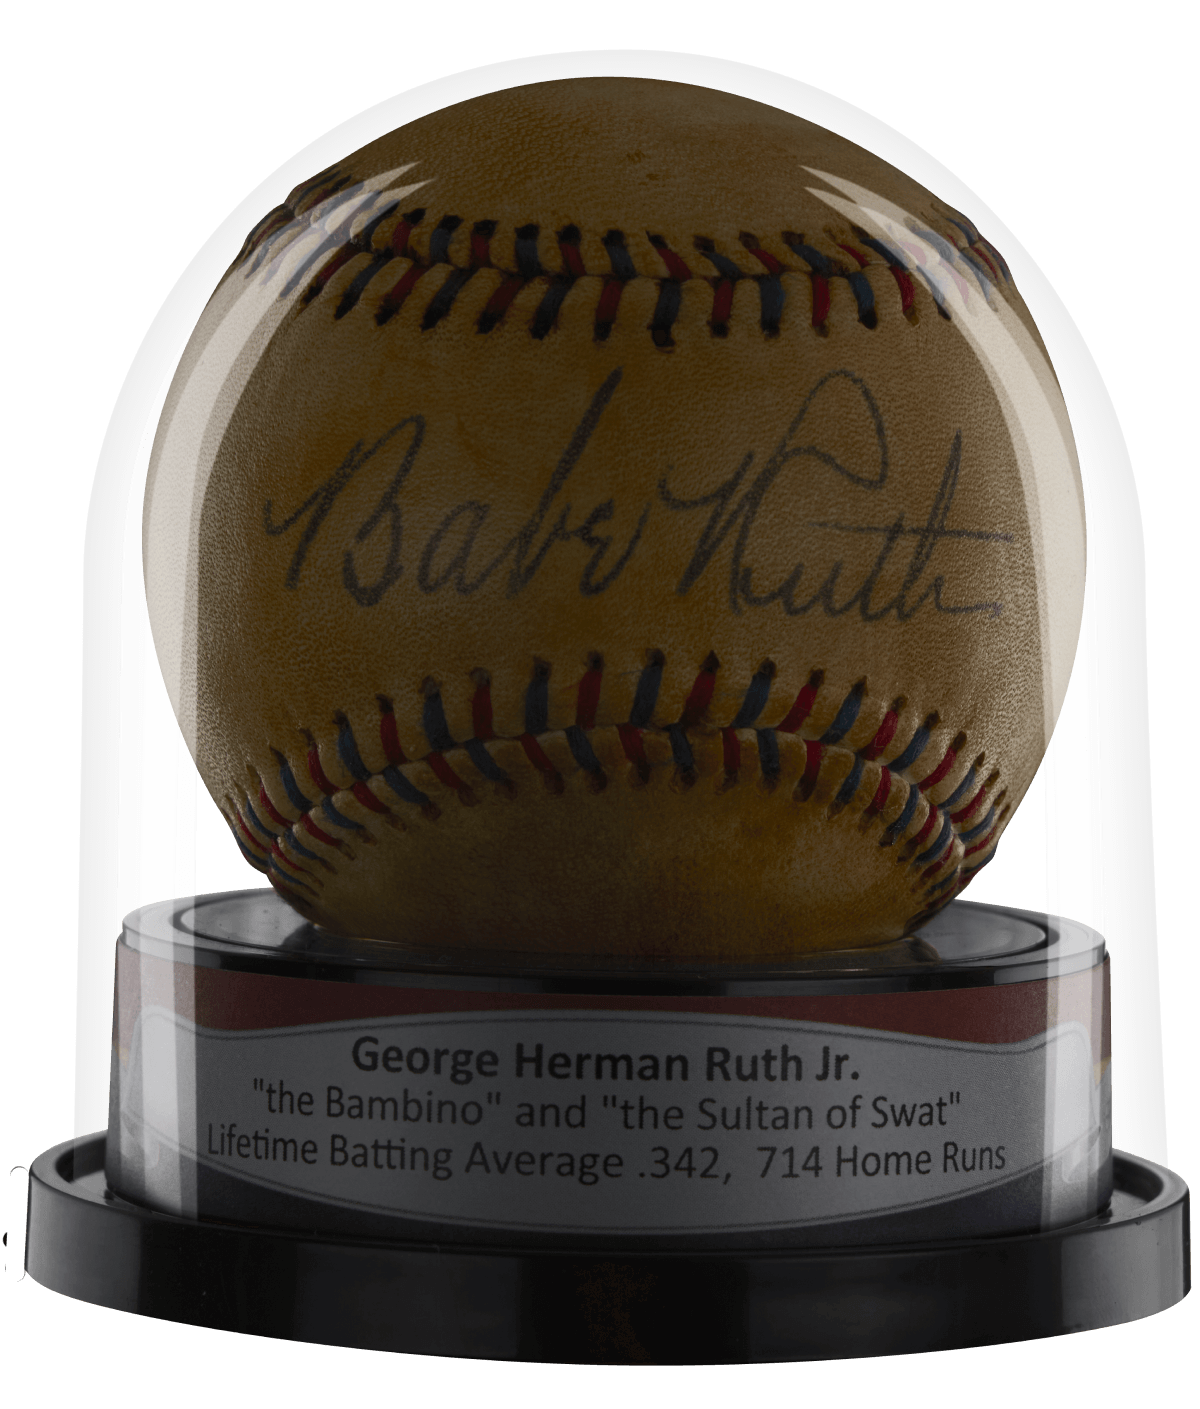 \images\Balldome Babe Ruth autographed ball